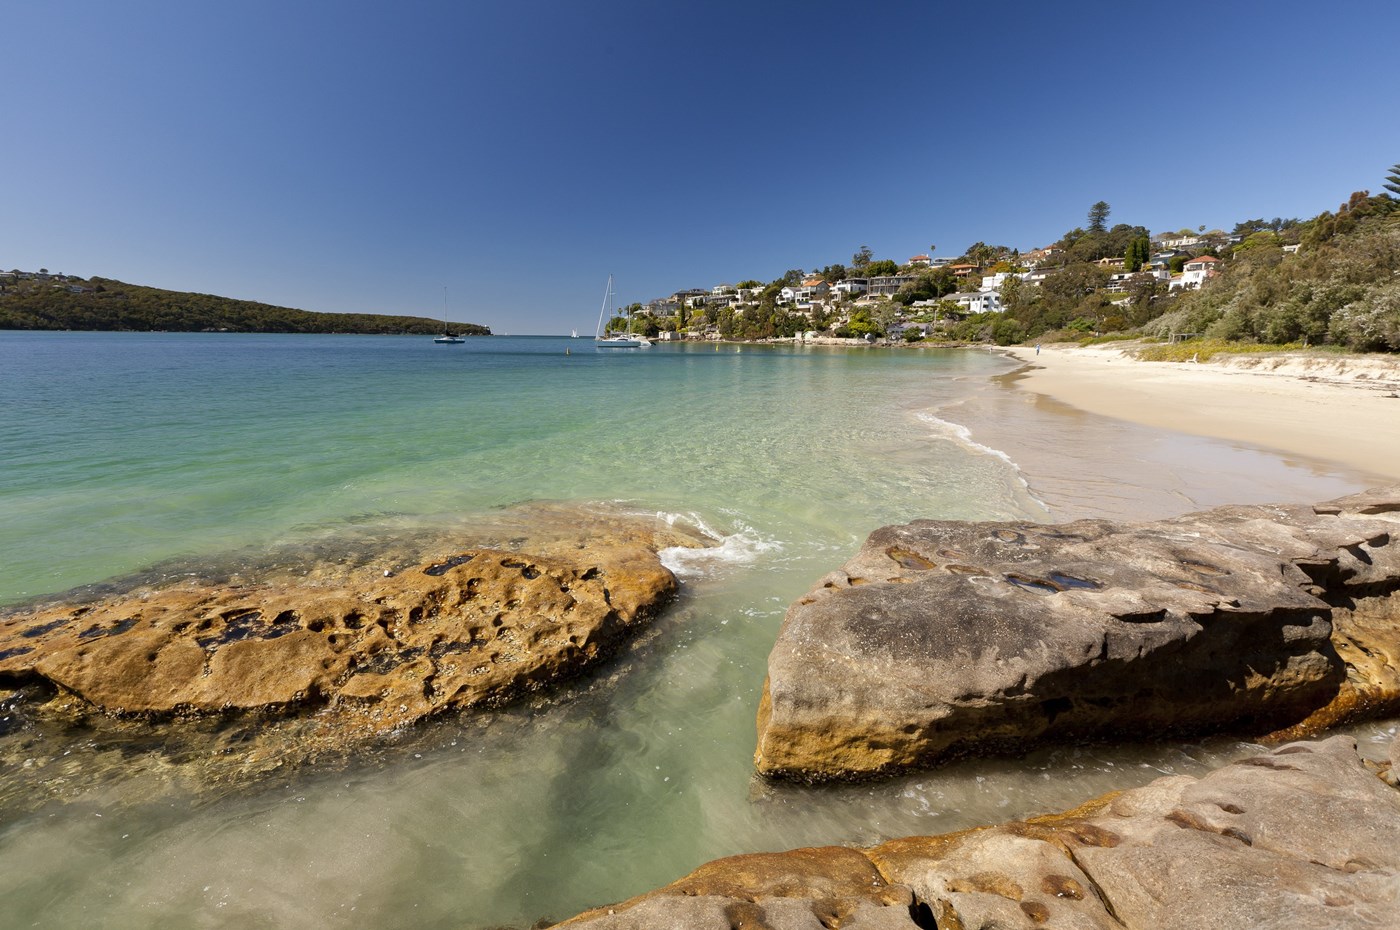 Chinaman's Beach in Mosman. Credit- Andrew Gregory, Destination NSW